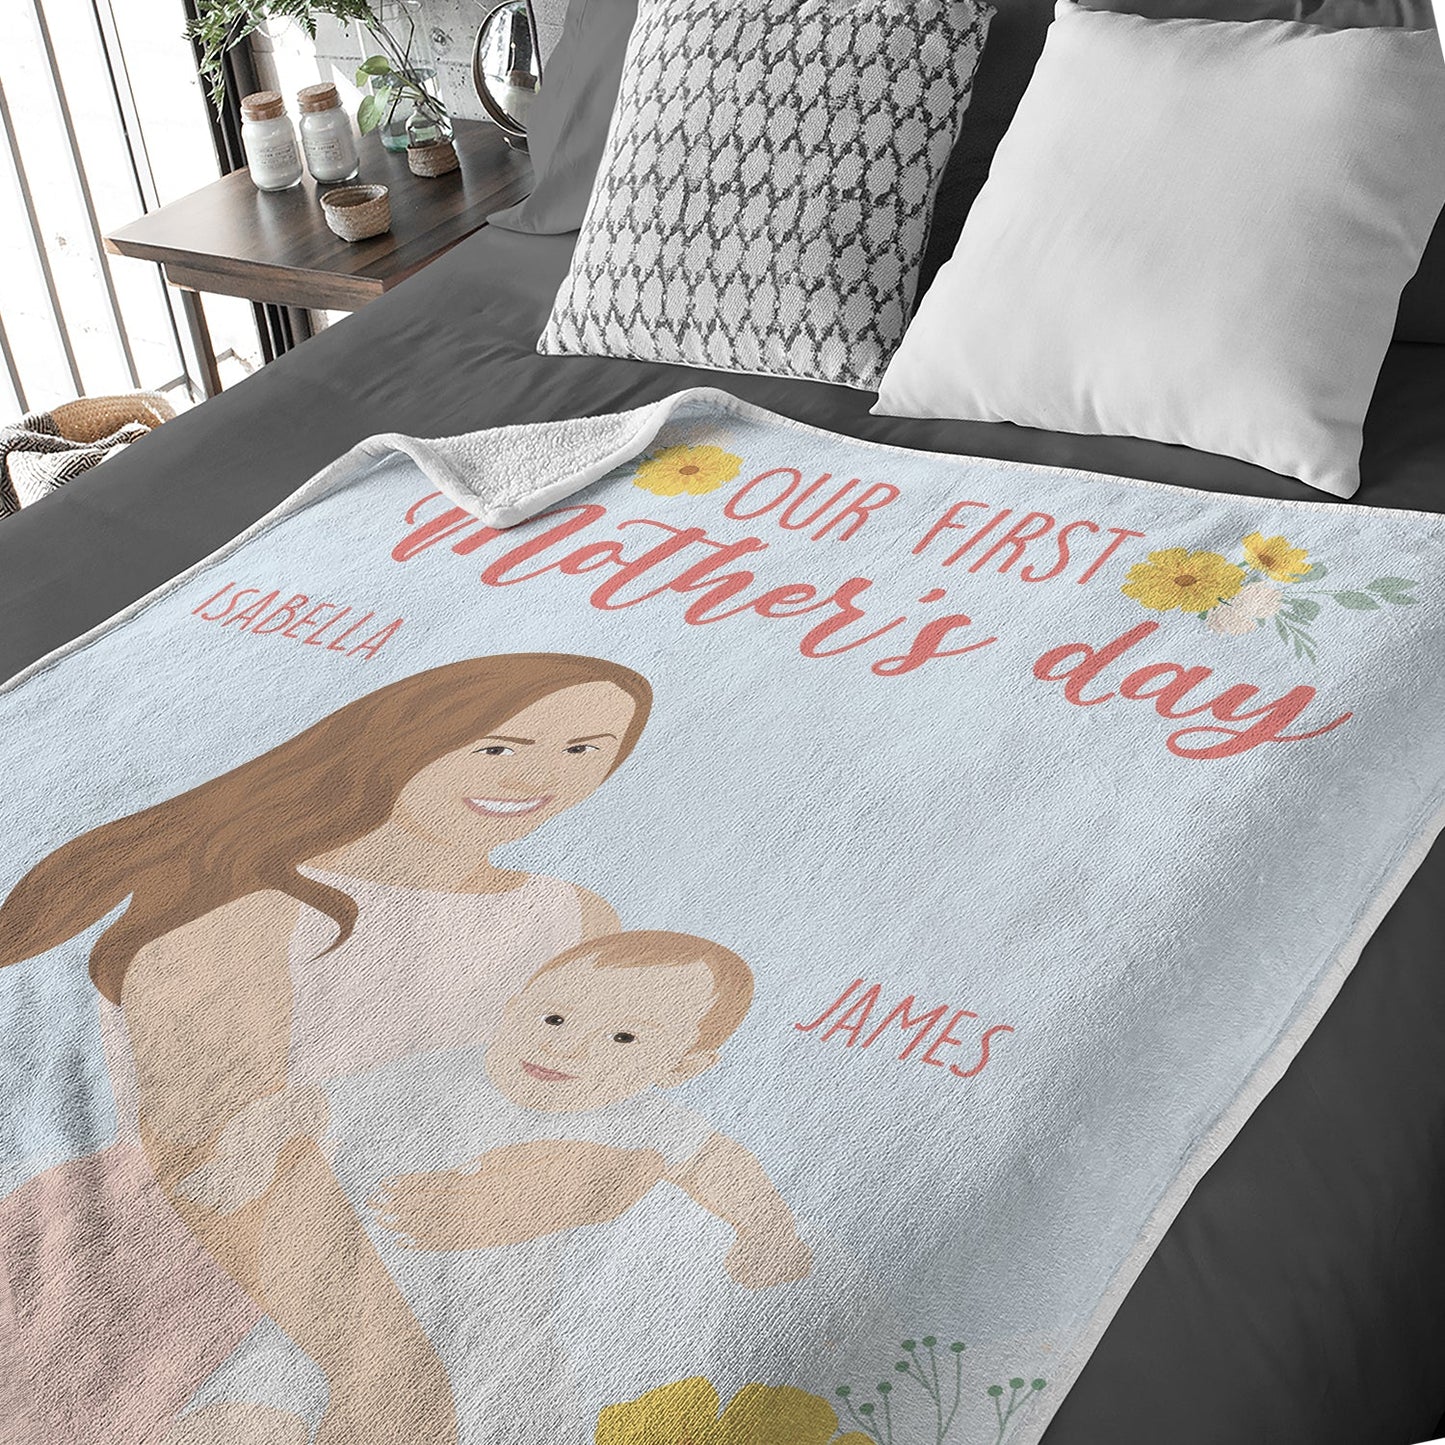 Our First Mothers Day Blanket Personalized